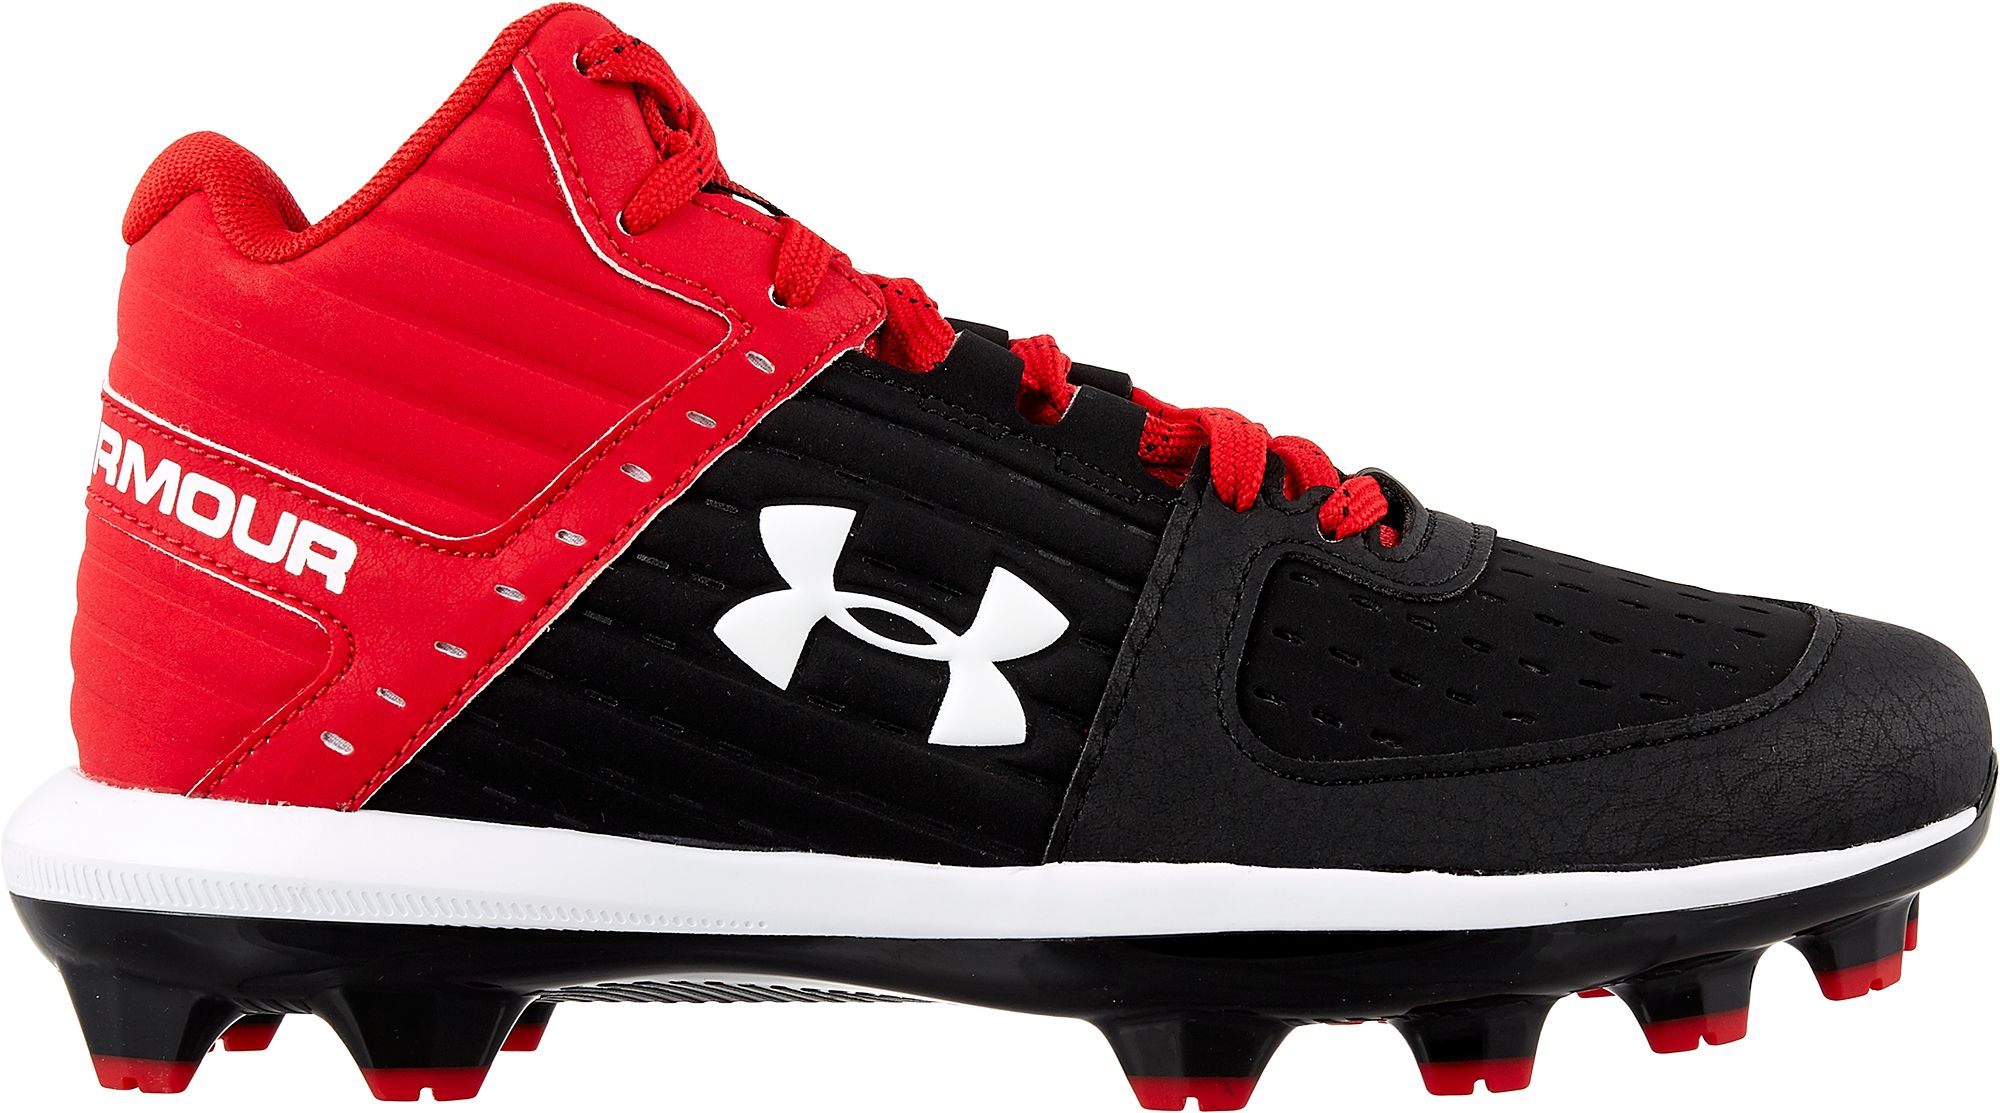 red under armour softball cleats